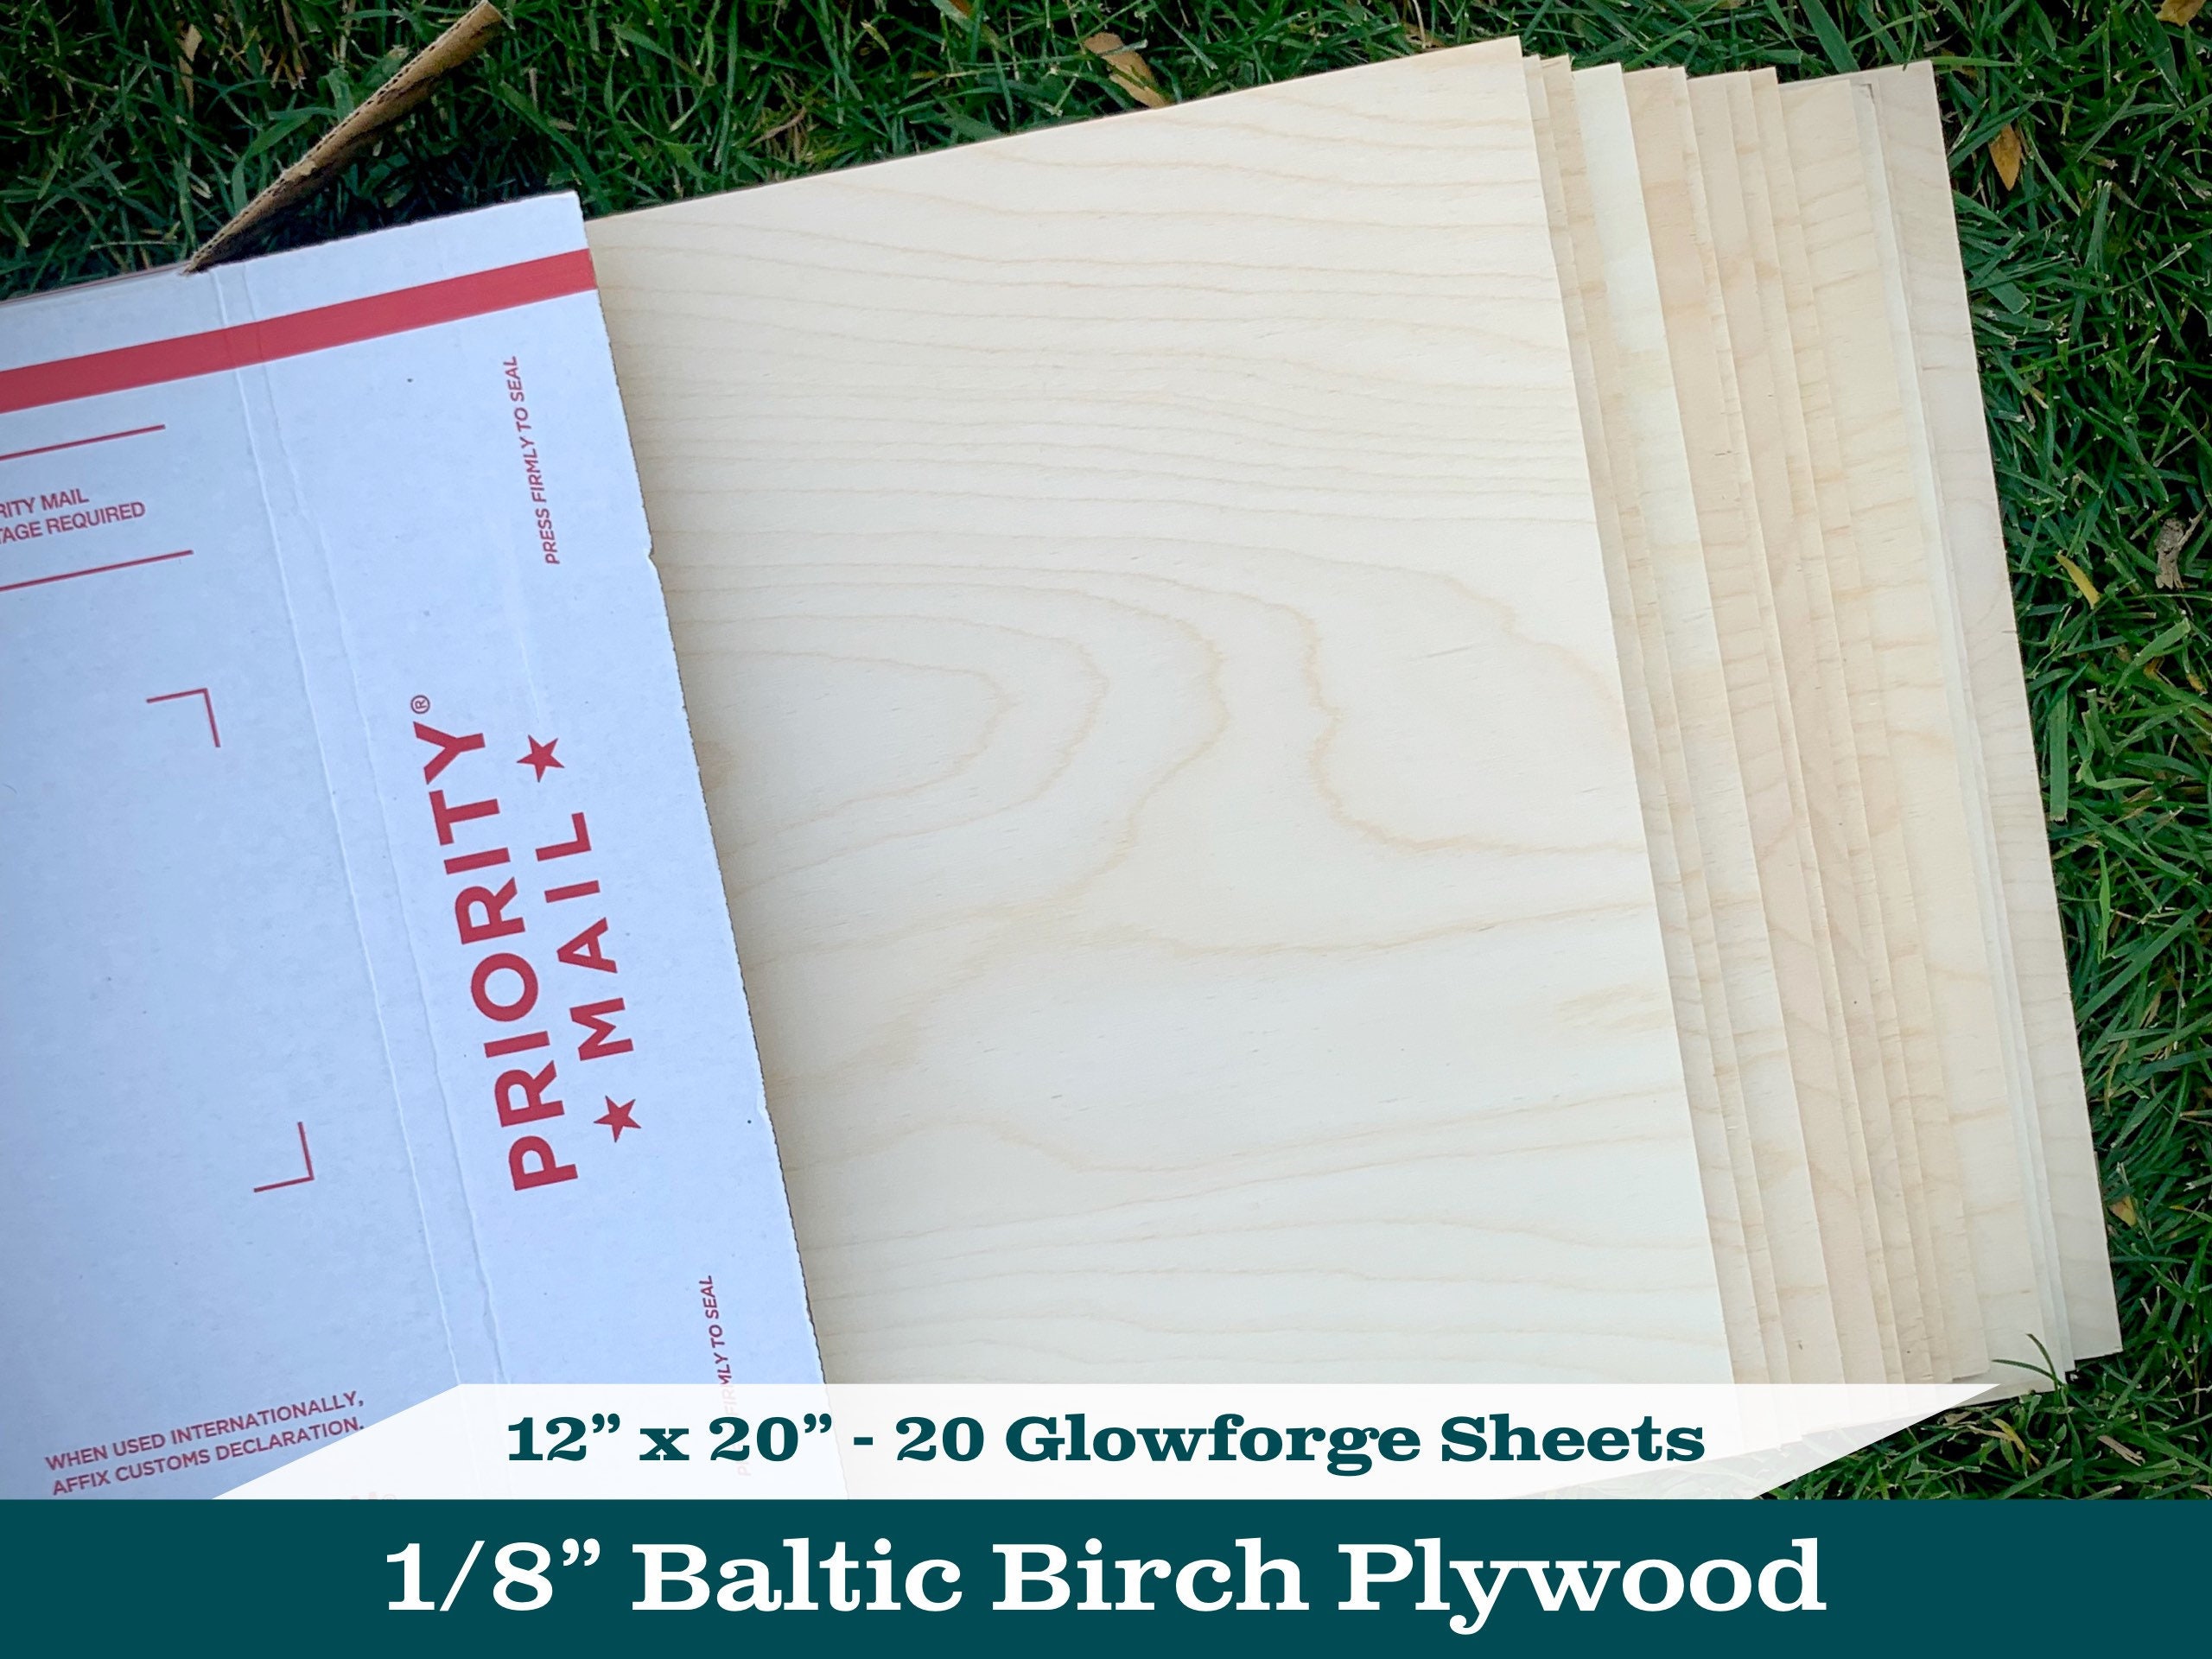 Baltic Birch Plywood Sheets 1/8 X 12 X 20, Wholesale Plywood Supplier of  Wood for Glowforge, Laser, Crafting Project, Wood Blanks 